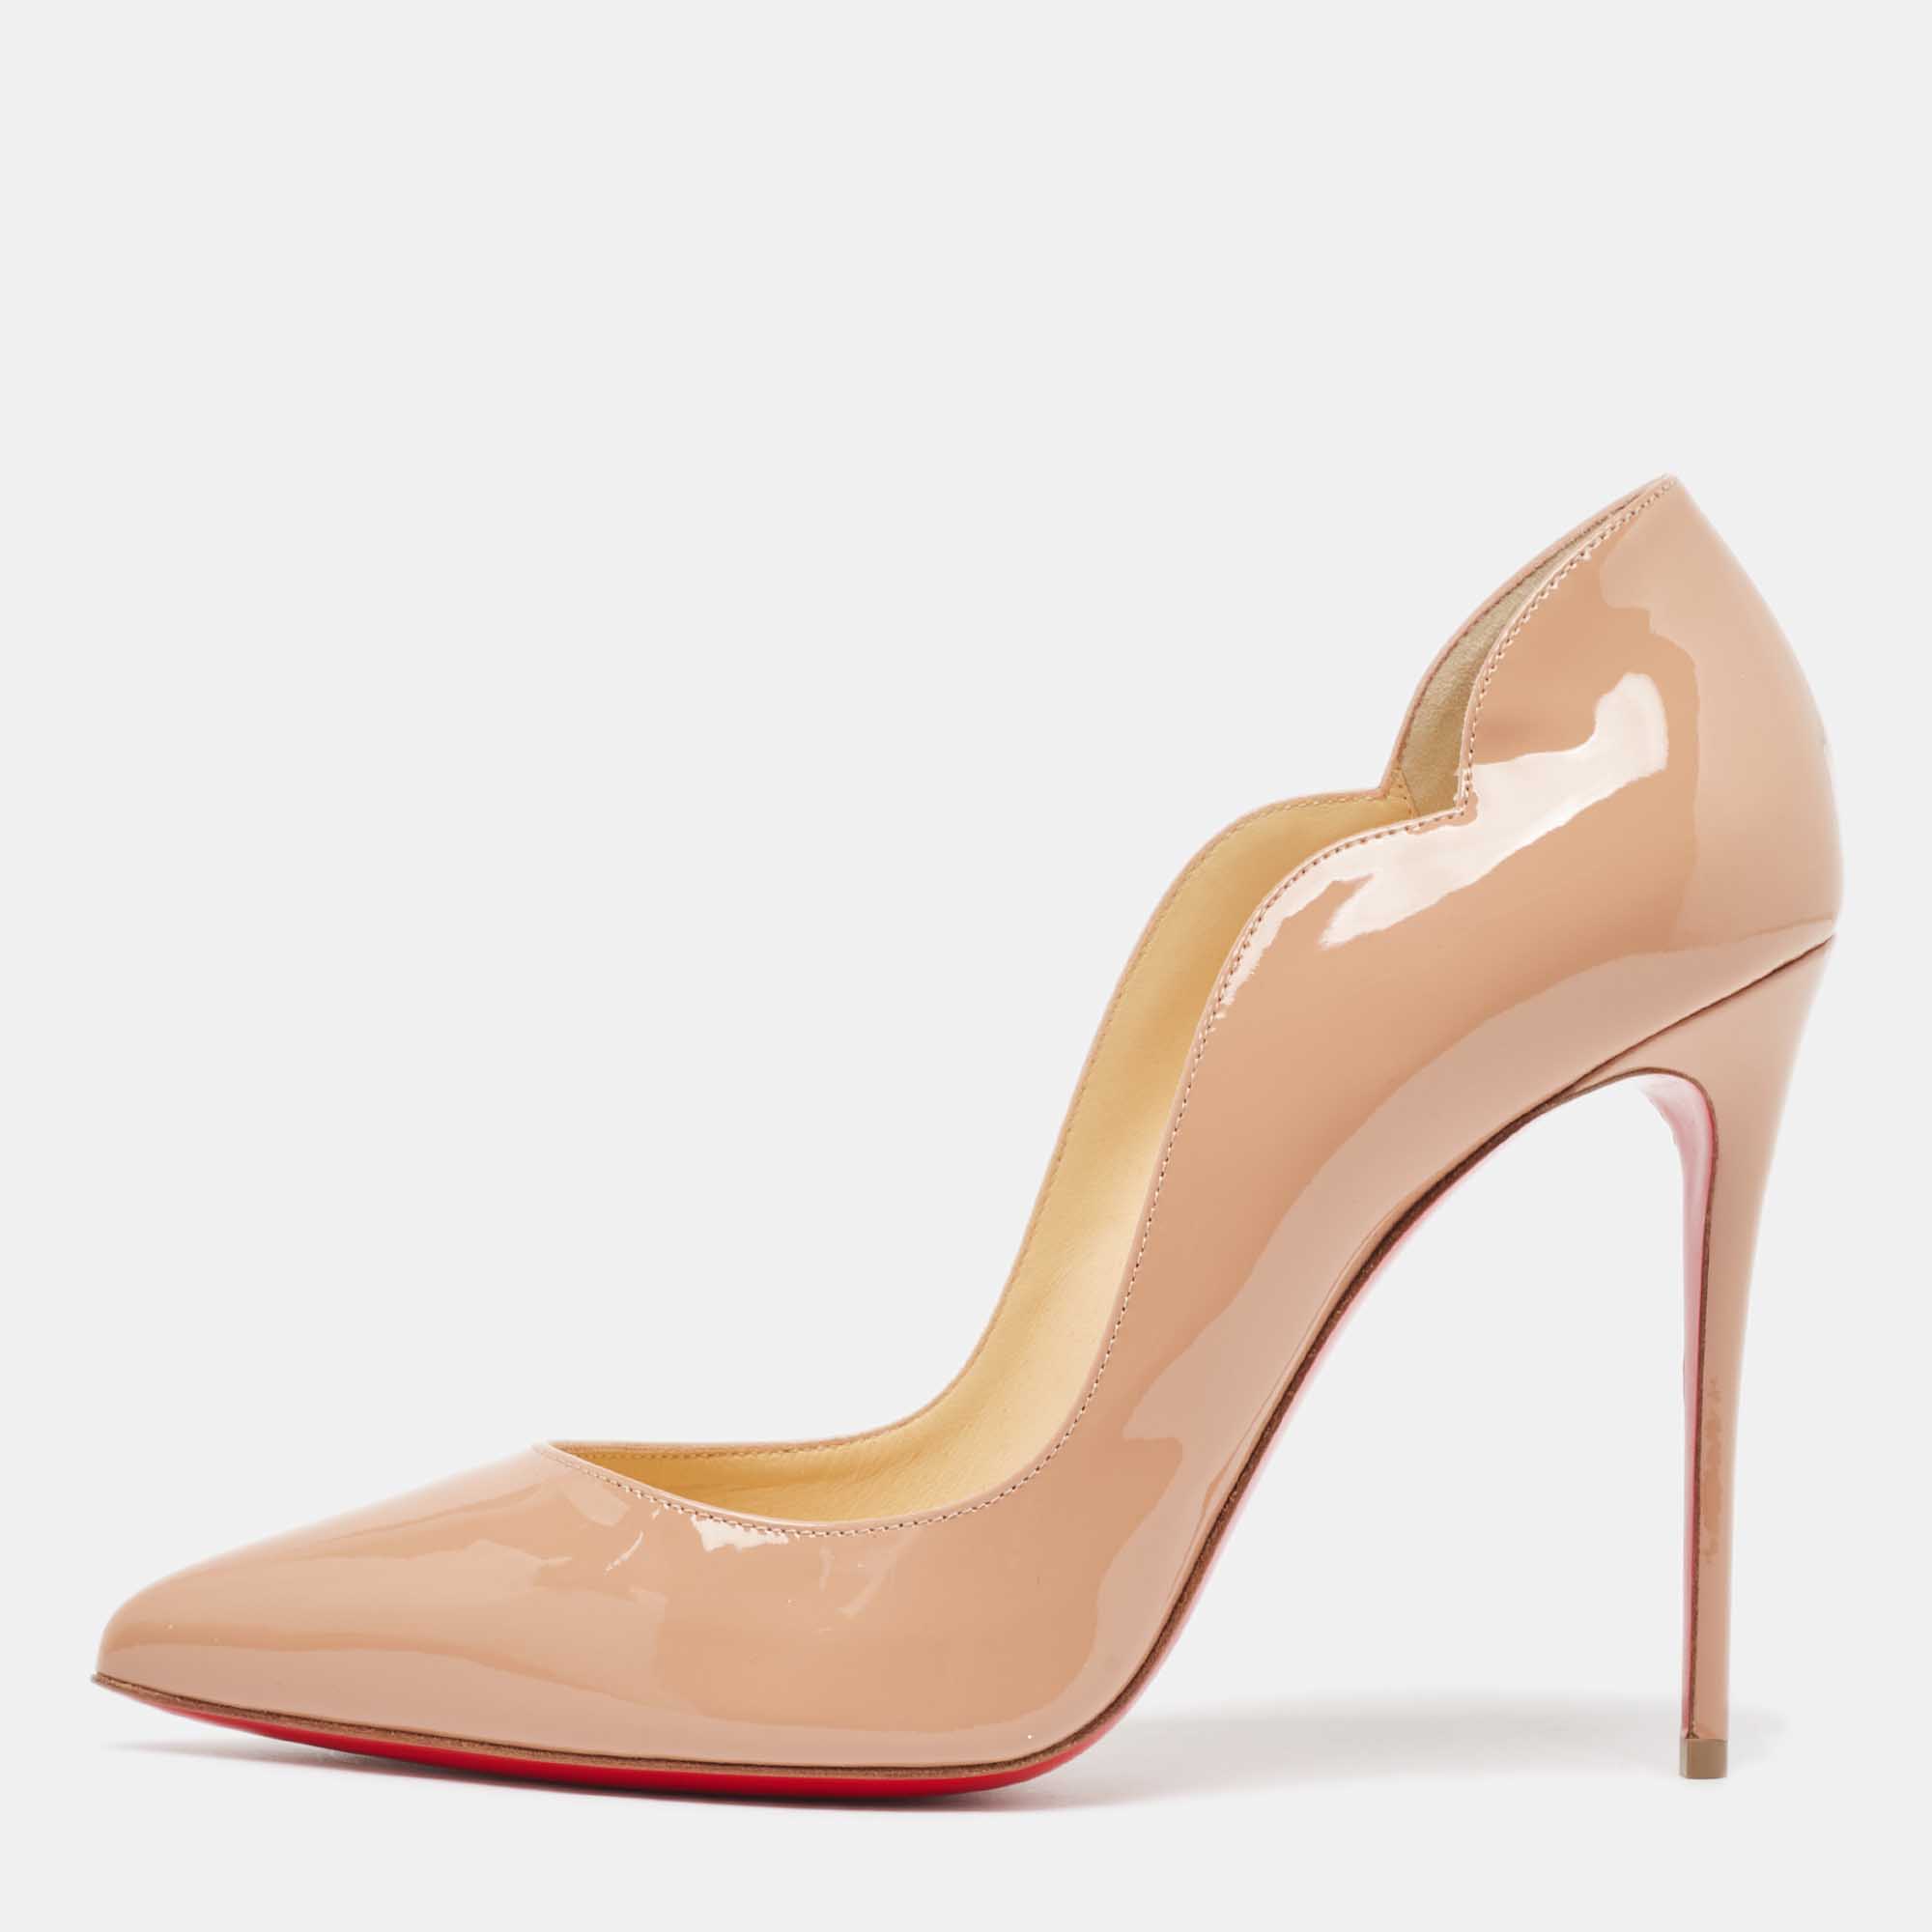 Christian louboutin beige patent leather hot chick pumps size 40